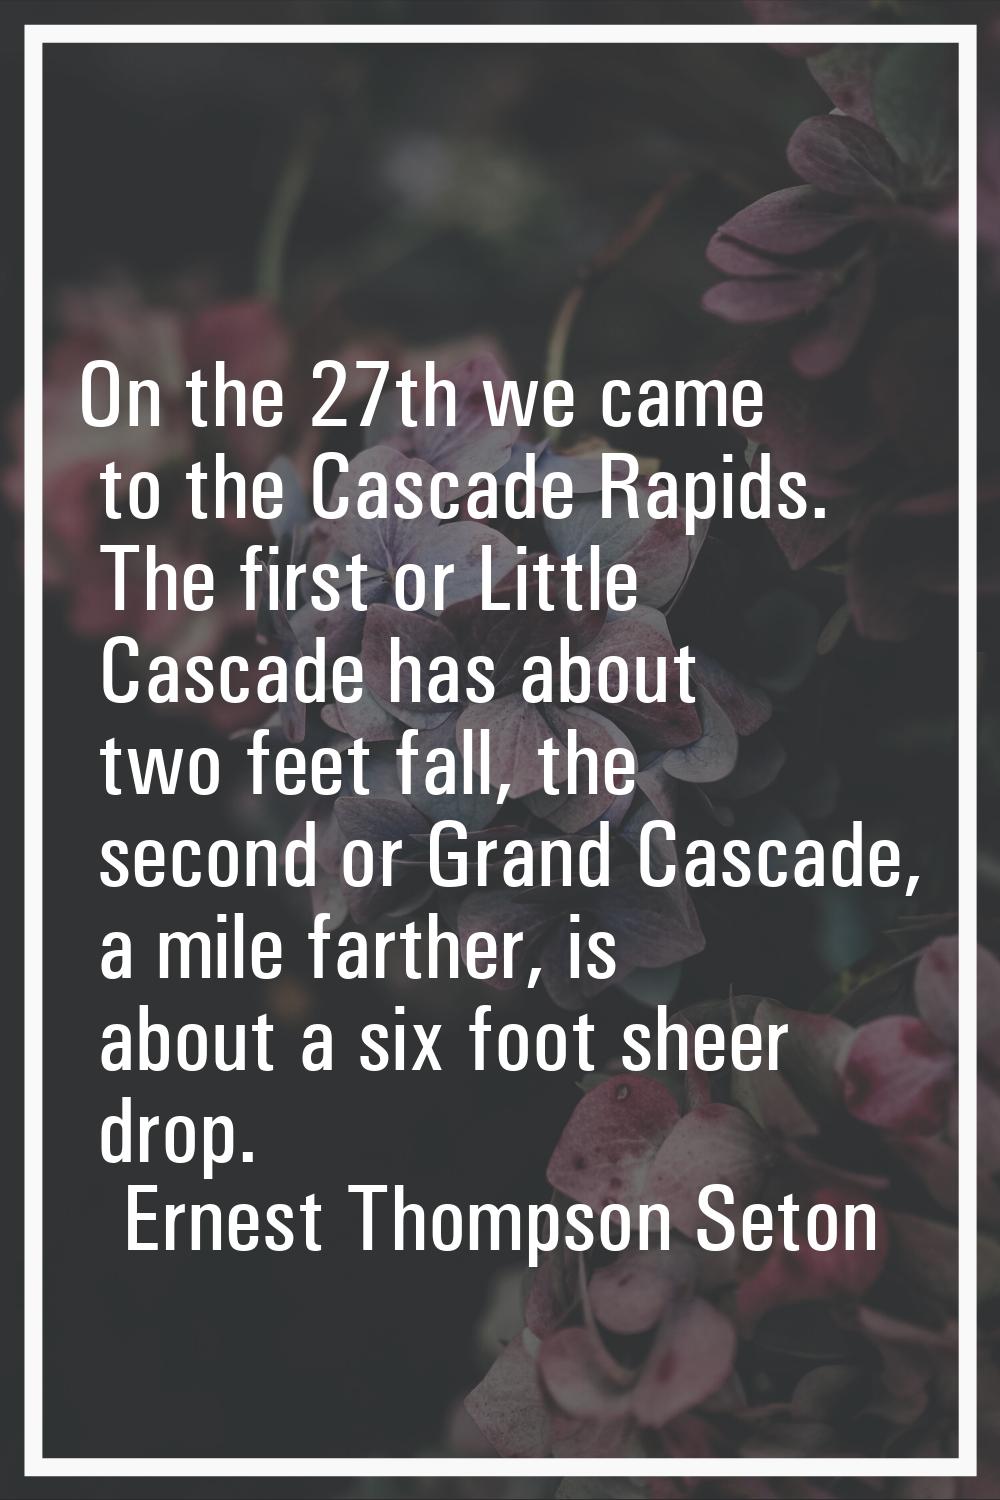 On the 27th we came to the Cascade Rapids. The first or Little Cascade has about two feet fall, the